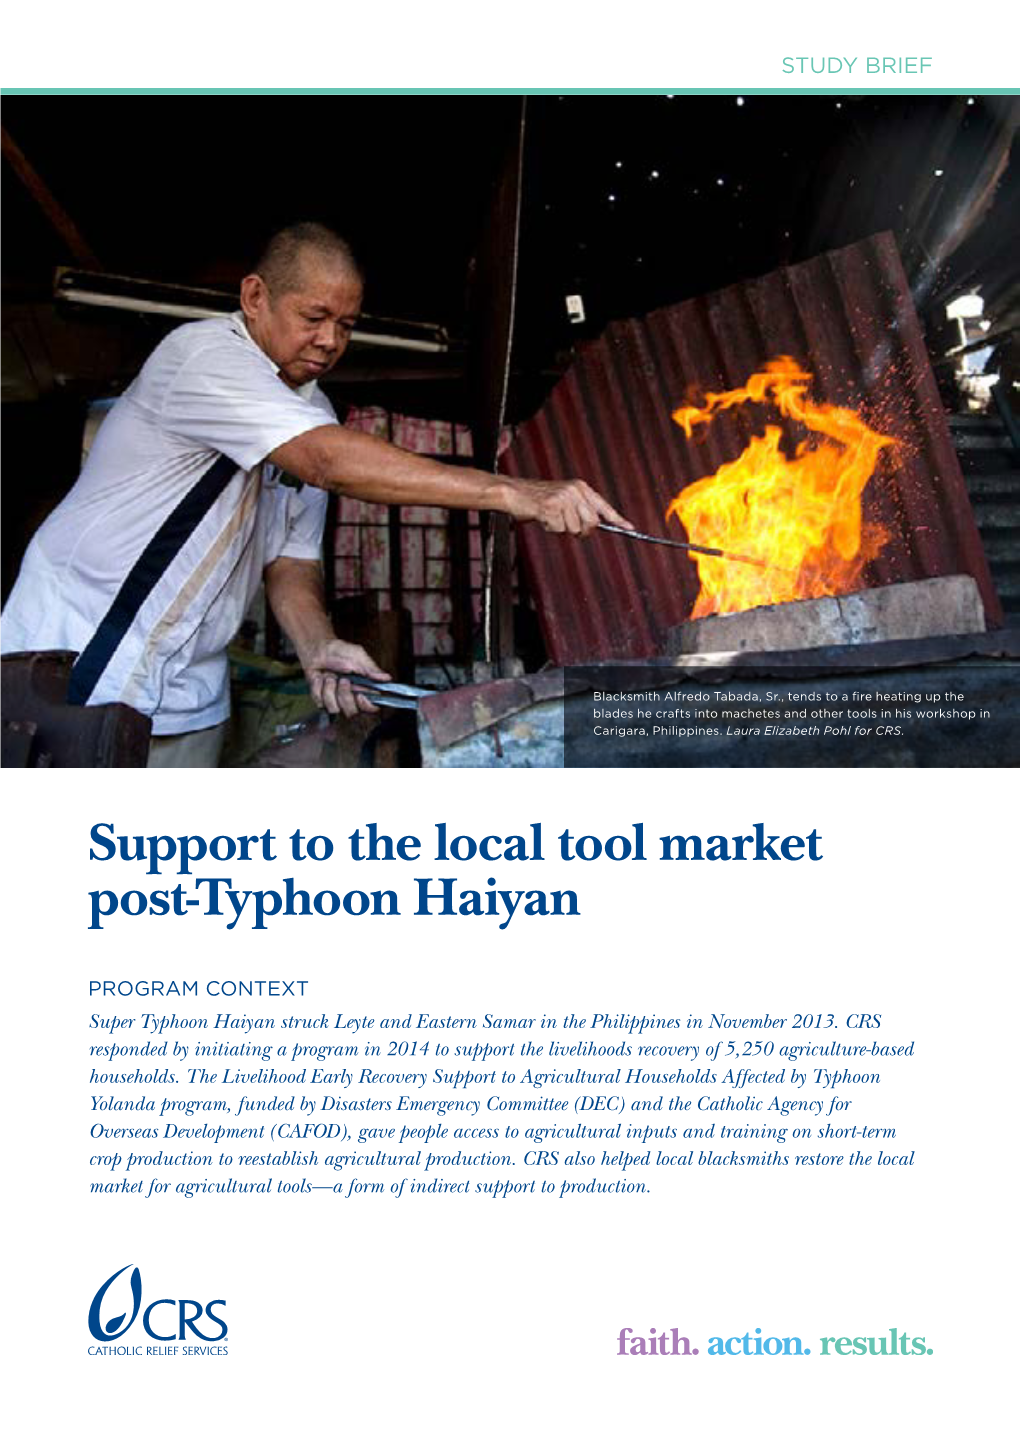 Support to the Local Tool Market Post-Typhoon Haiyan